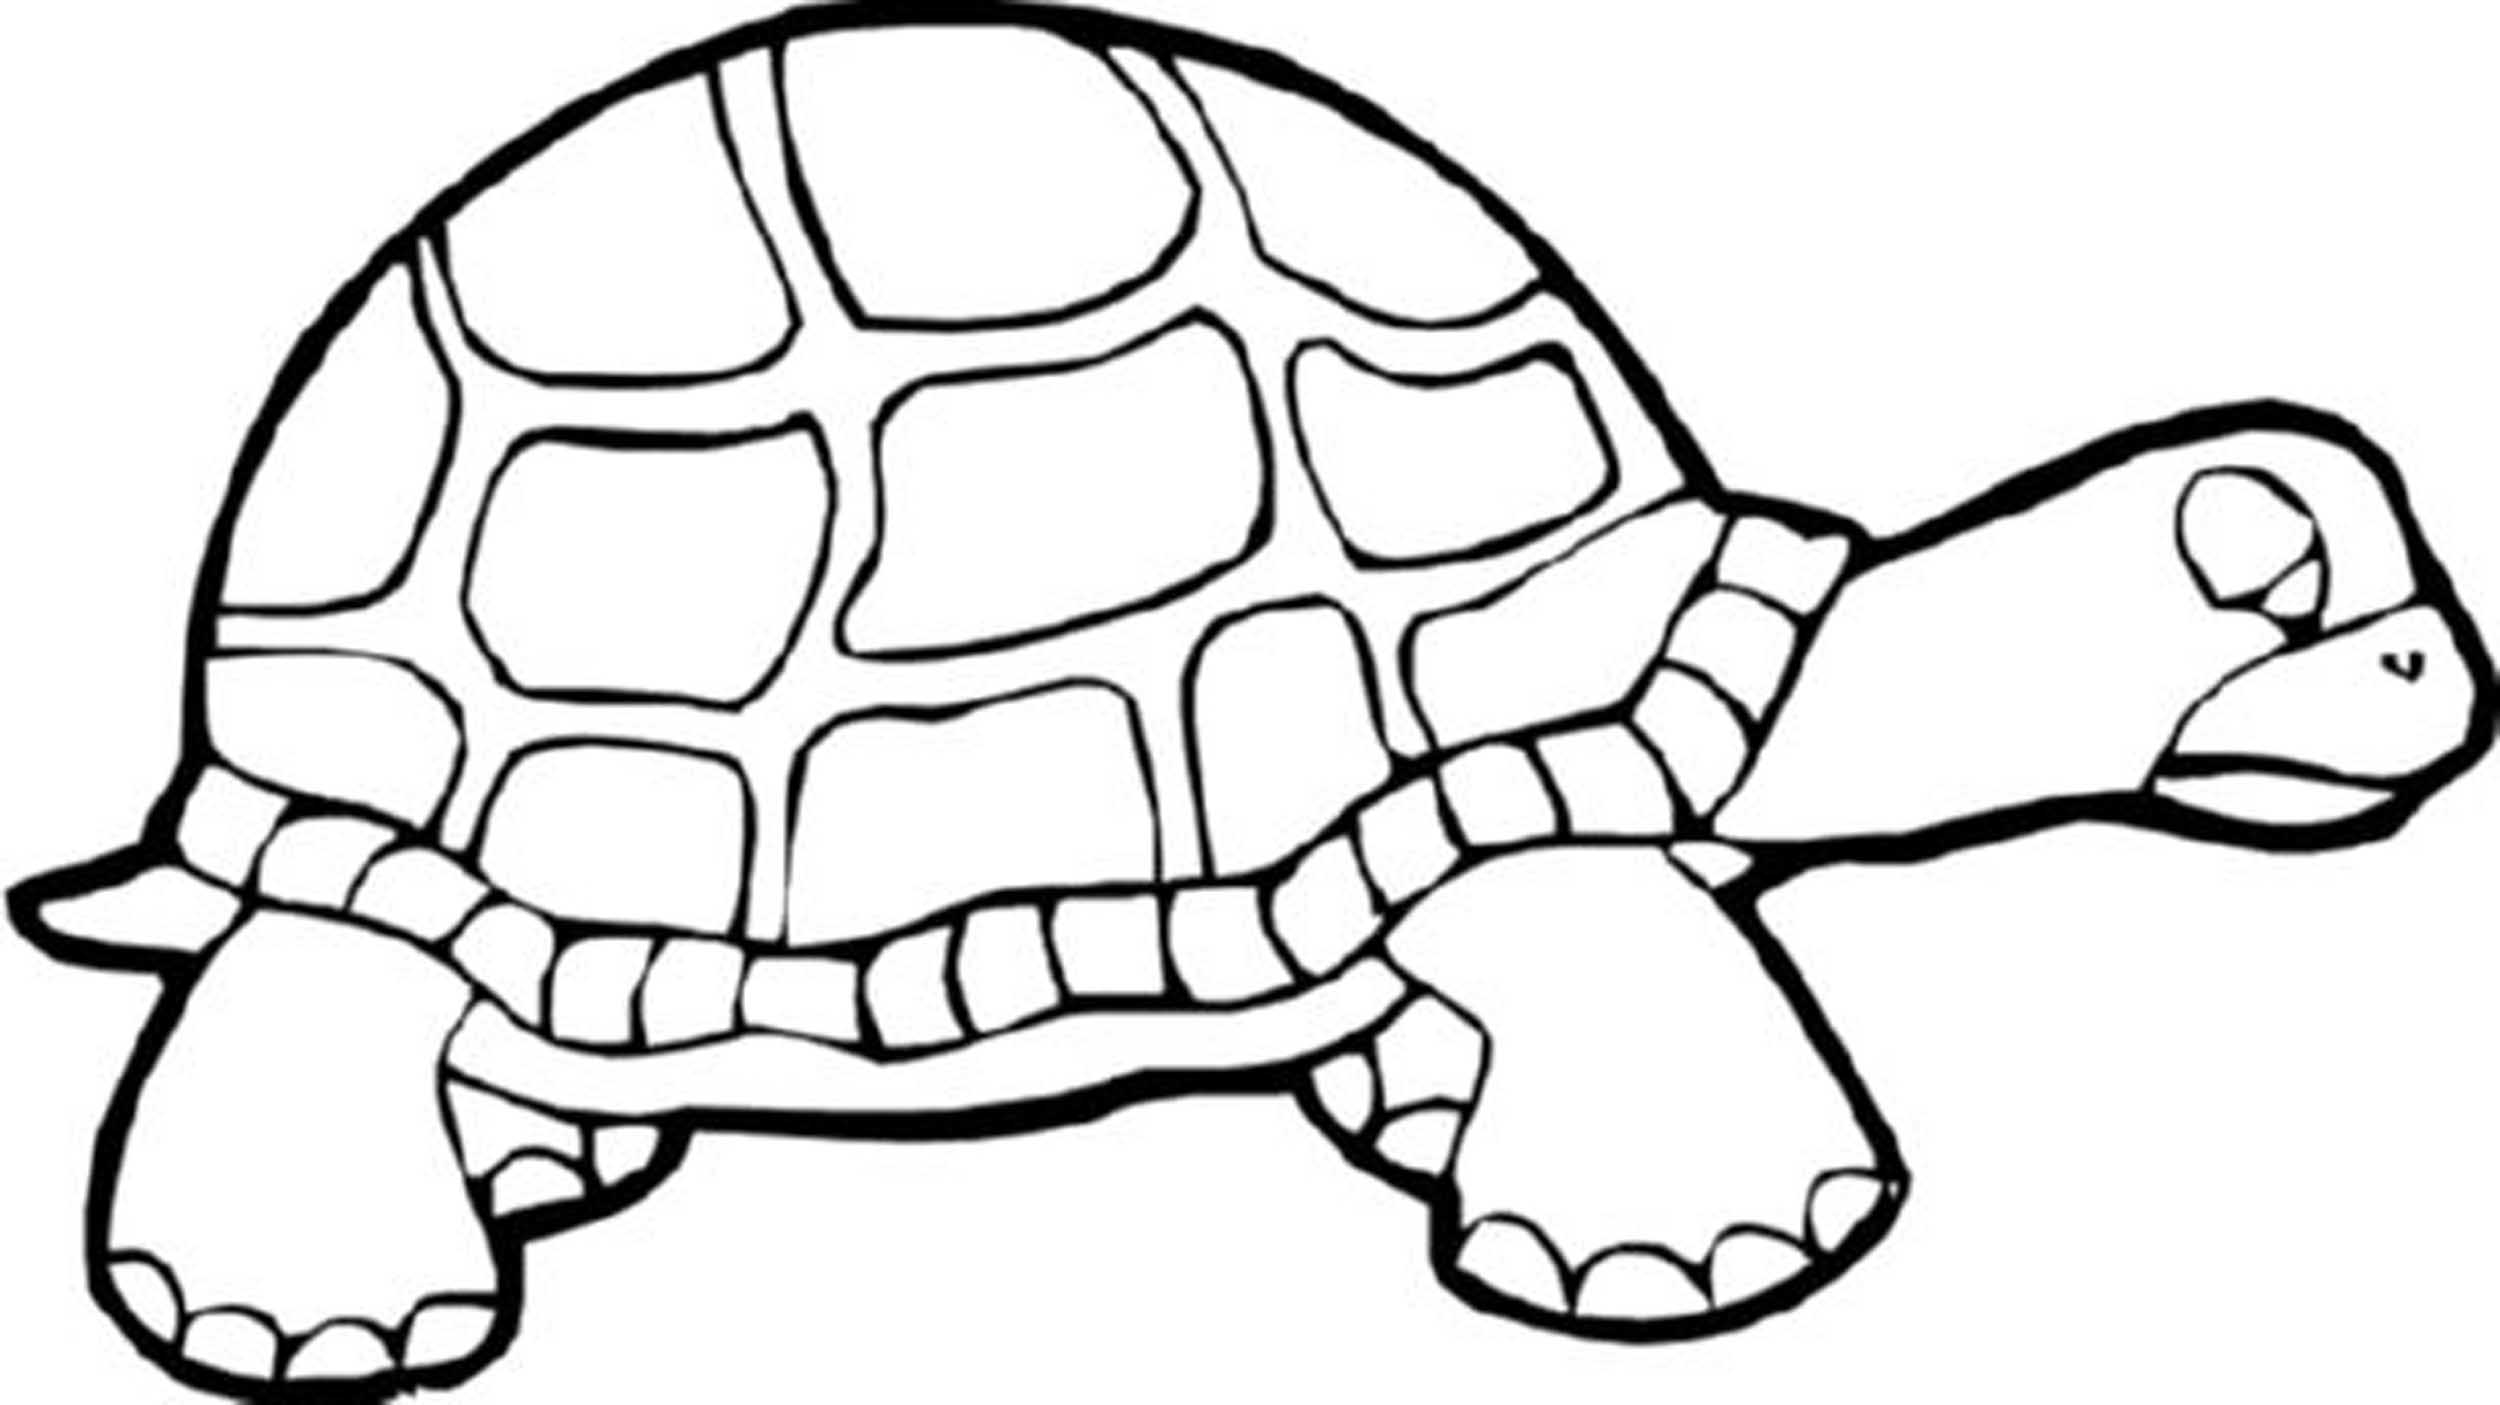 Turtle - Coloring Pages for Kids and for Adults